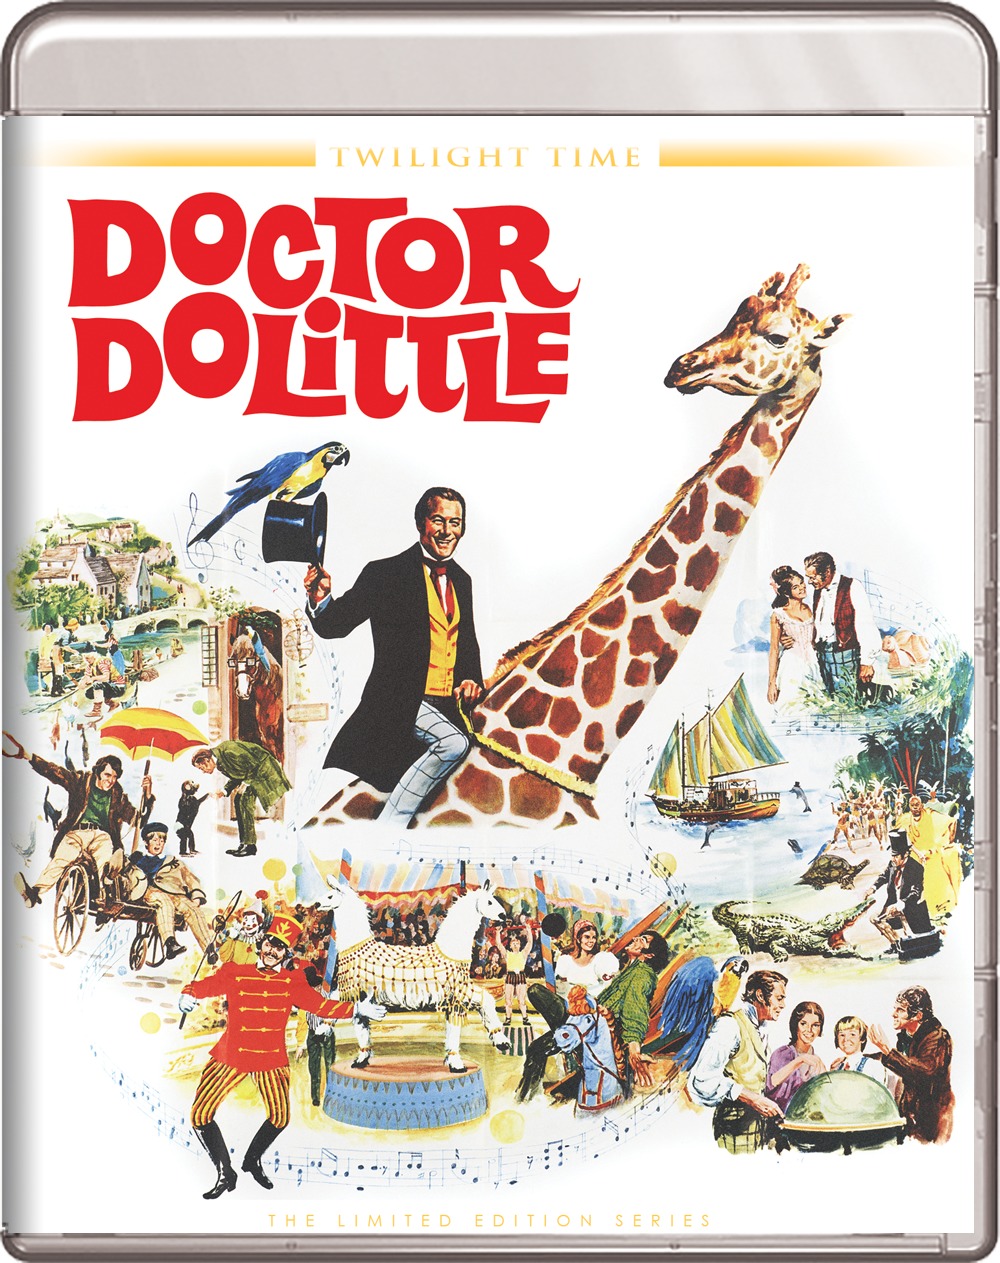 Doctor Dolittle (1967) El Extravagante Doctor Dolittle (1967) [AC3 2.0 + SUP] [Blu Ray-Rip] 48196_front